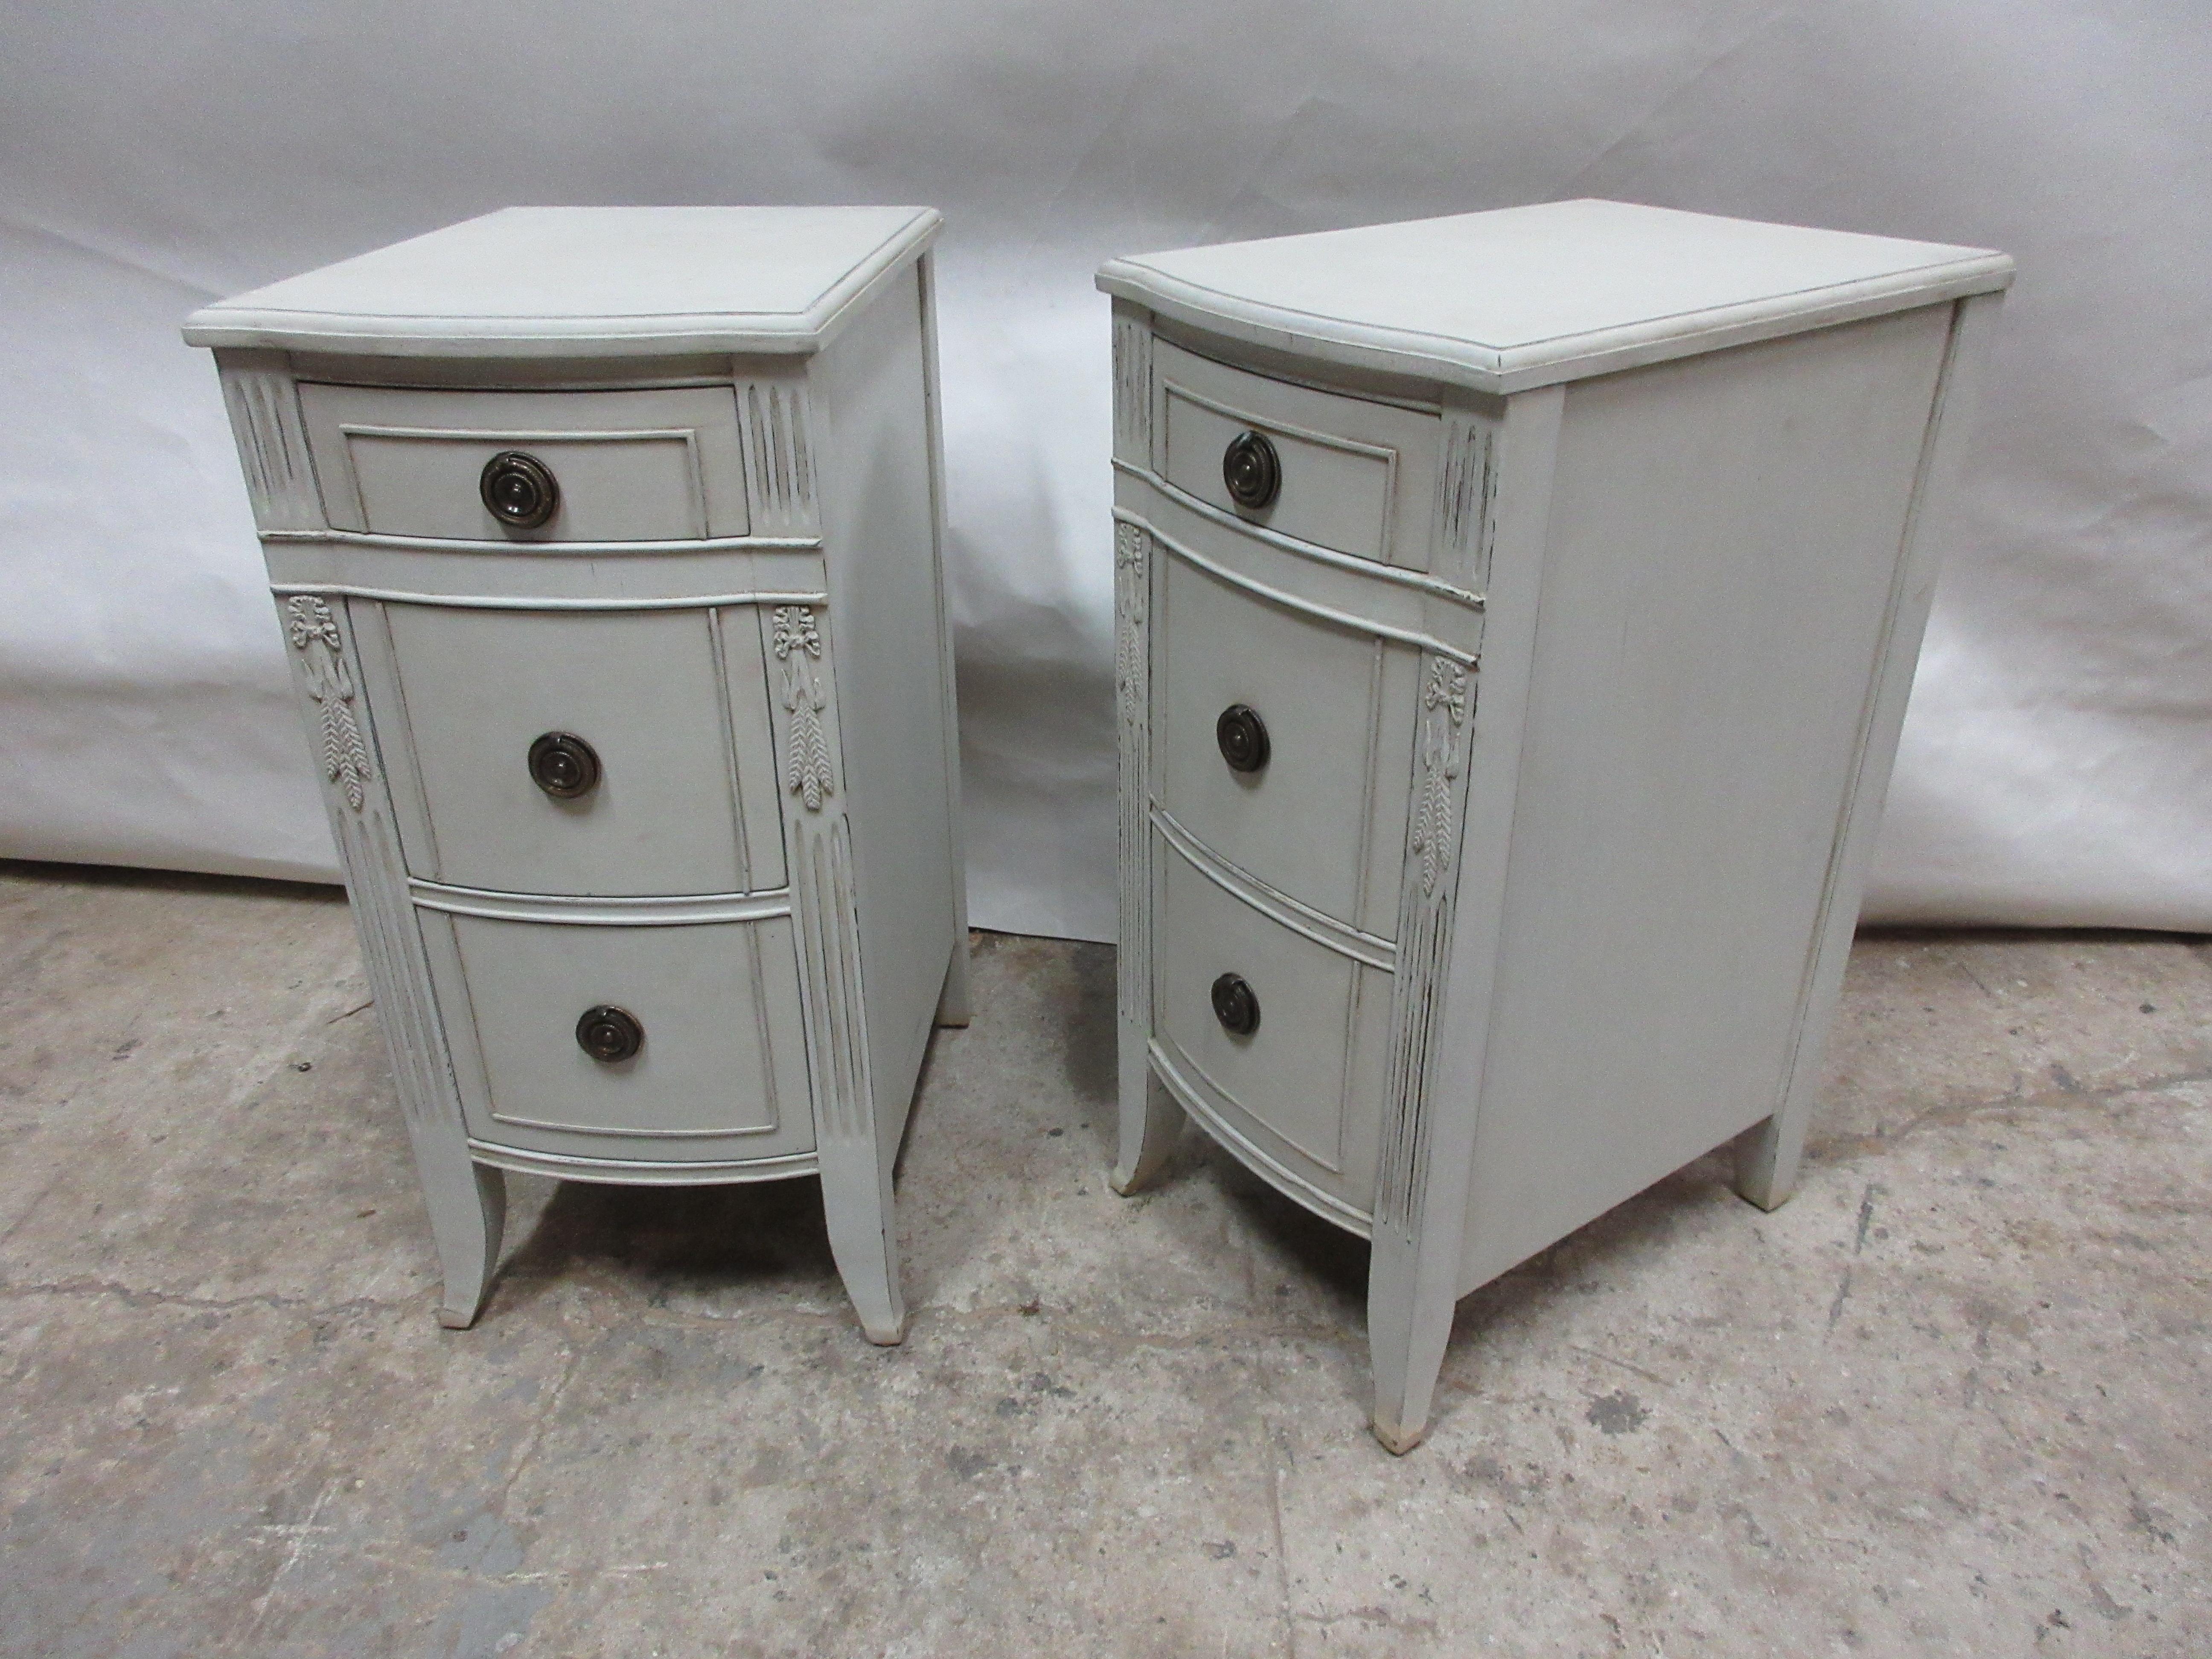 This is a set of 2, 3-drawer nightstands. They have been restored and repainted with milk paints 